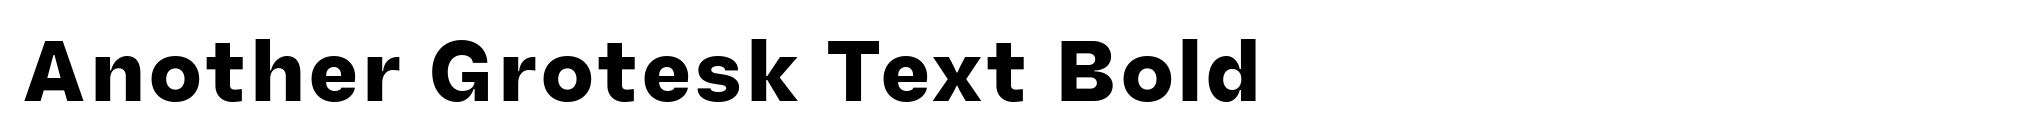 Another Grotesk Text Bold image